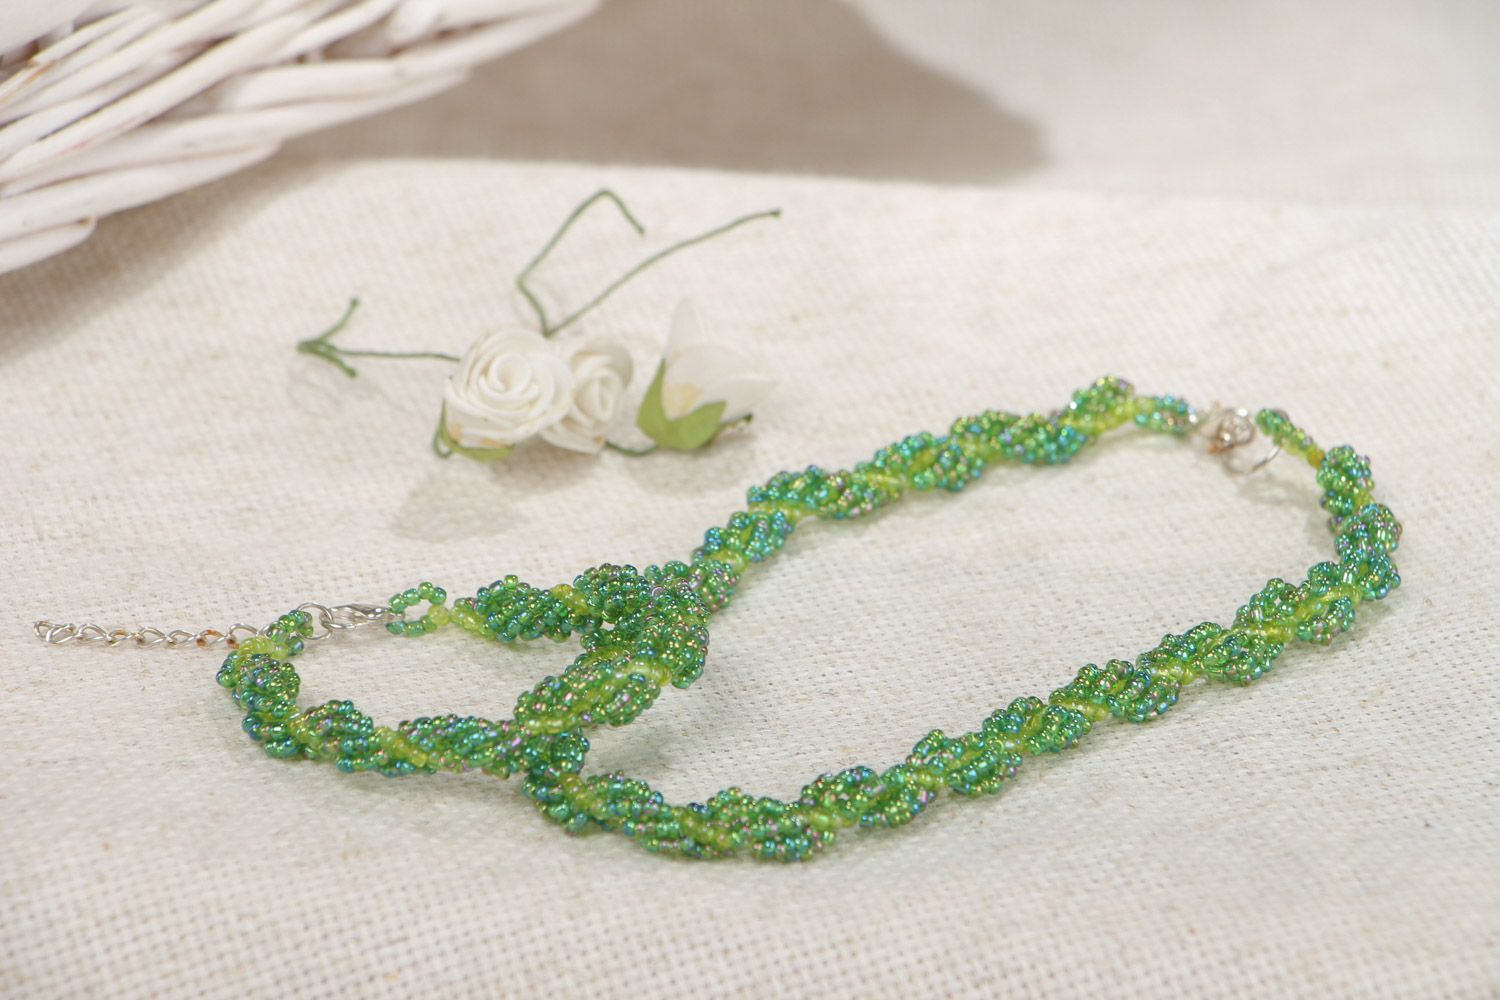 Handmade green woven beaded jewelry set 2 items bracelet and necklace photo 1